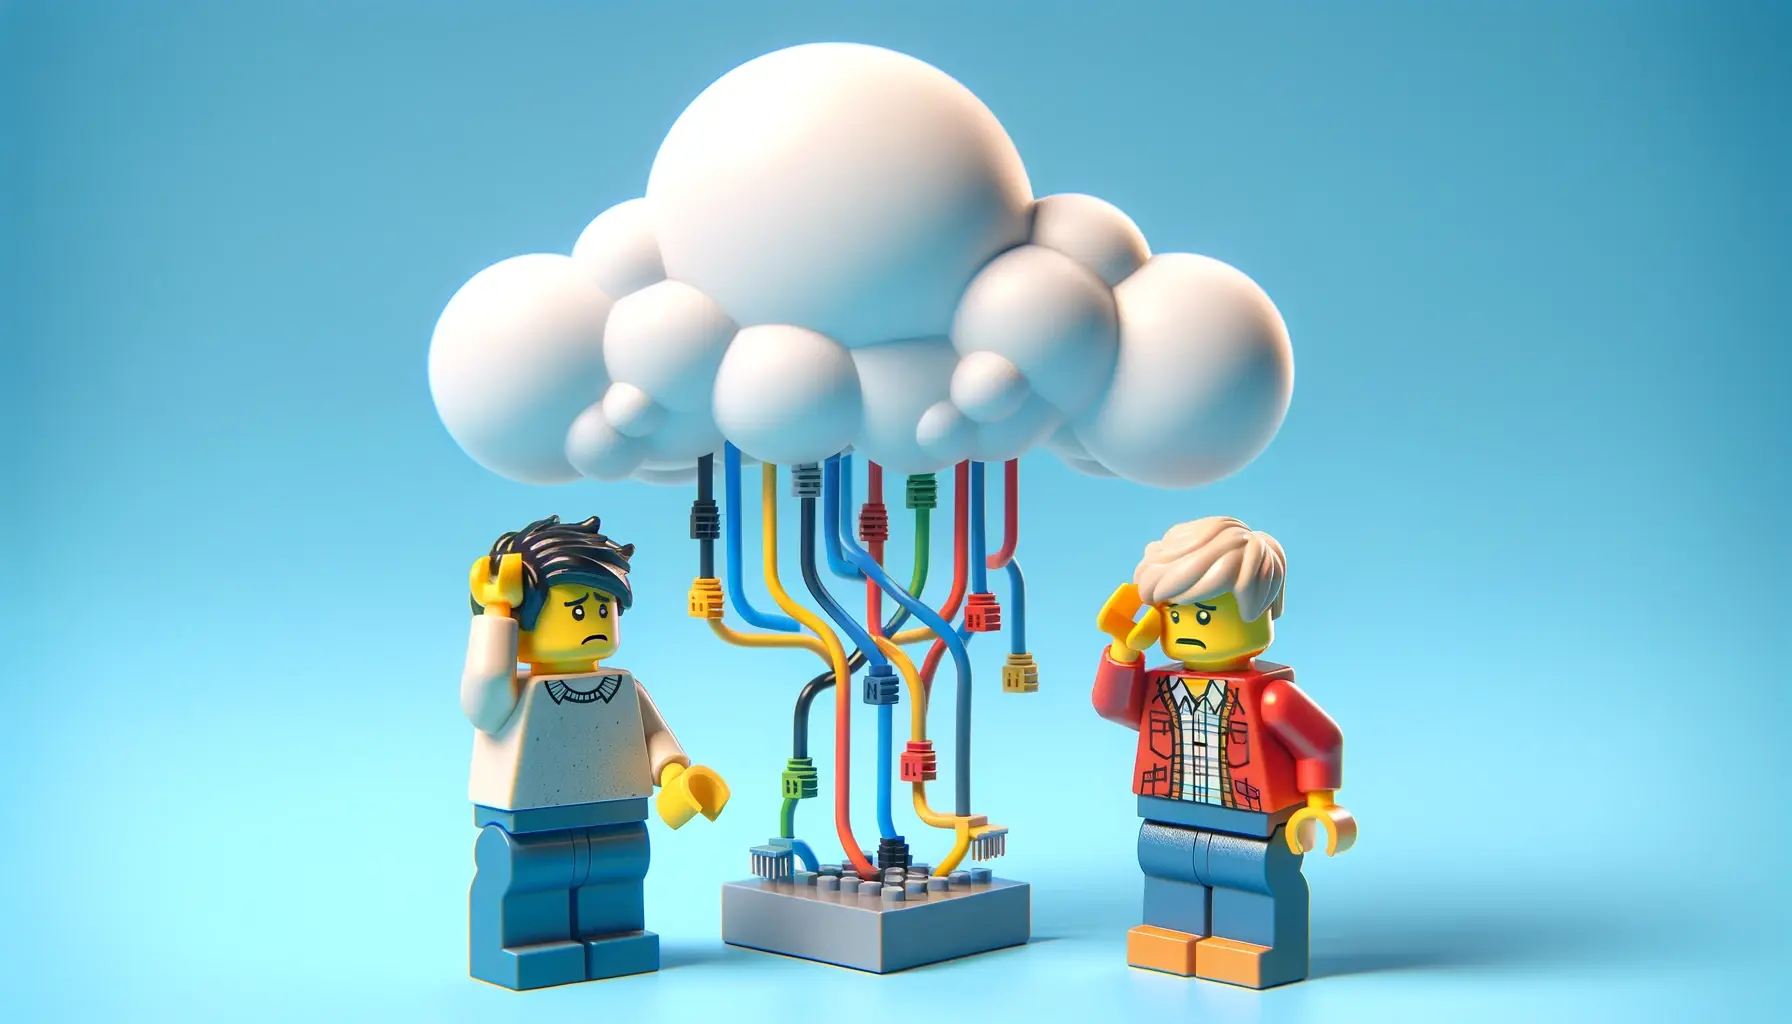 The image depicts a Lego man, standing and scratching his head with a puzzled expression. He is looking at a cloud network, and is very confused.